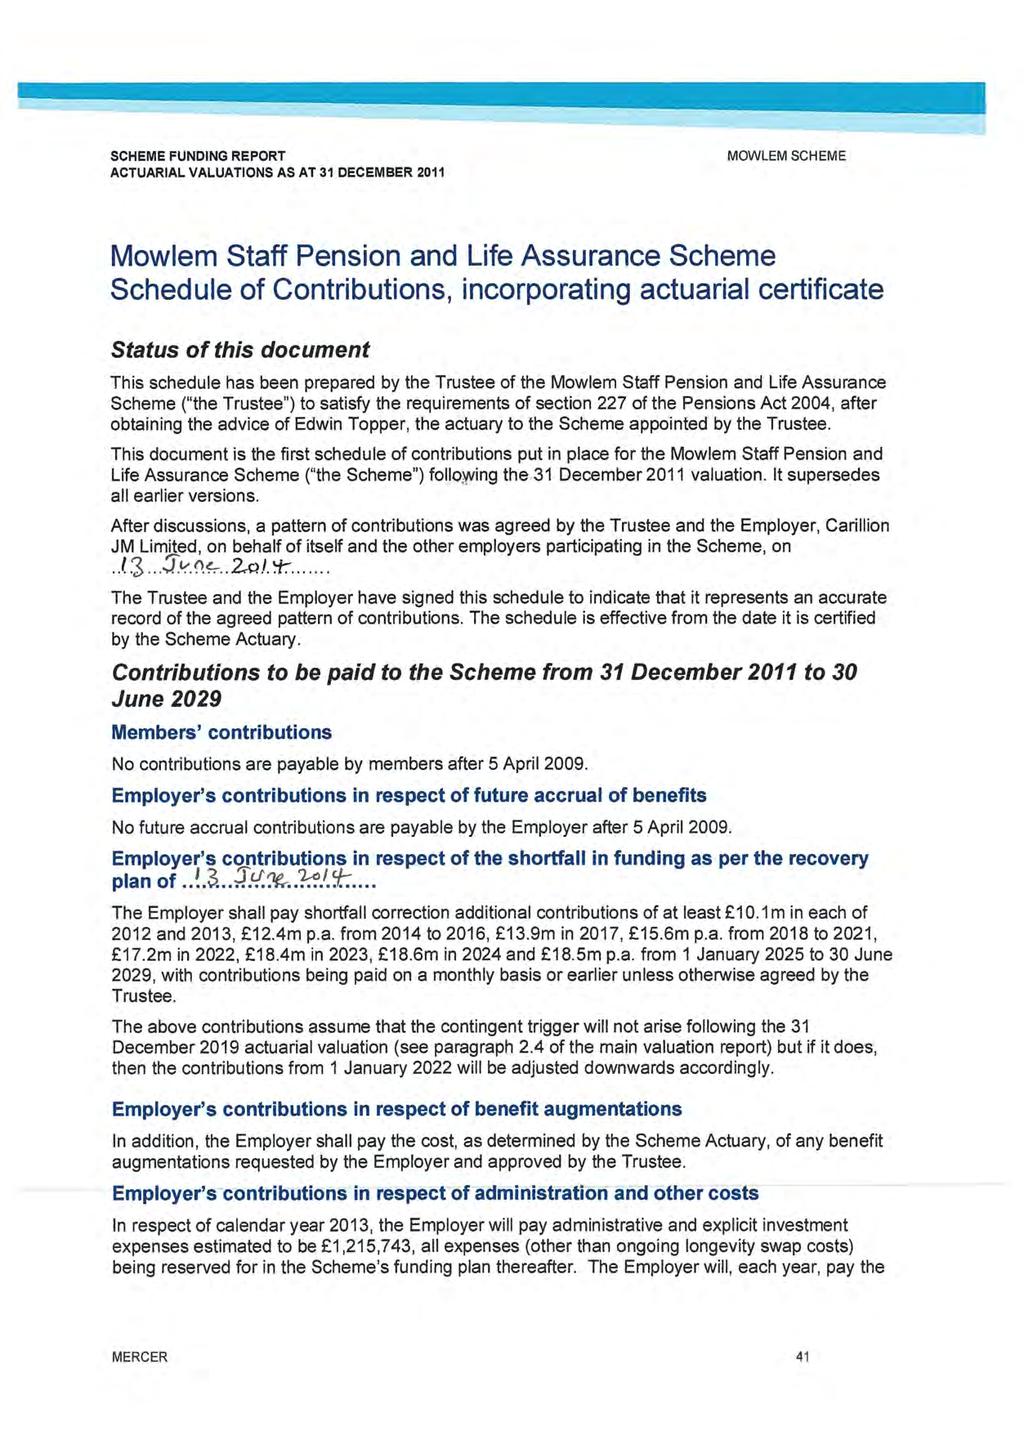 MOWLEM SCHEME Mowlem Staff Pension and Life Assurance Scheme Schedule of Contributions, incorporating actuarial certificate Status of this document This schedule has been prepared by the Trustee of